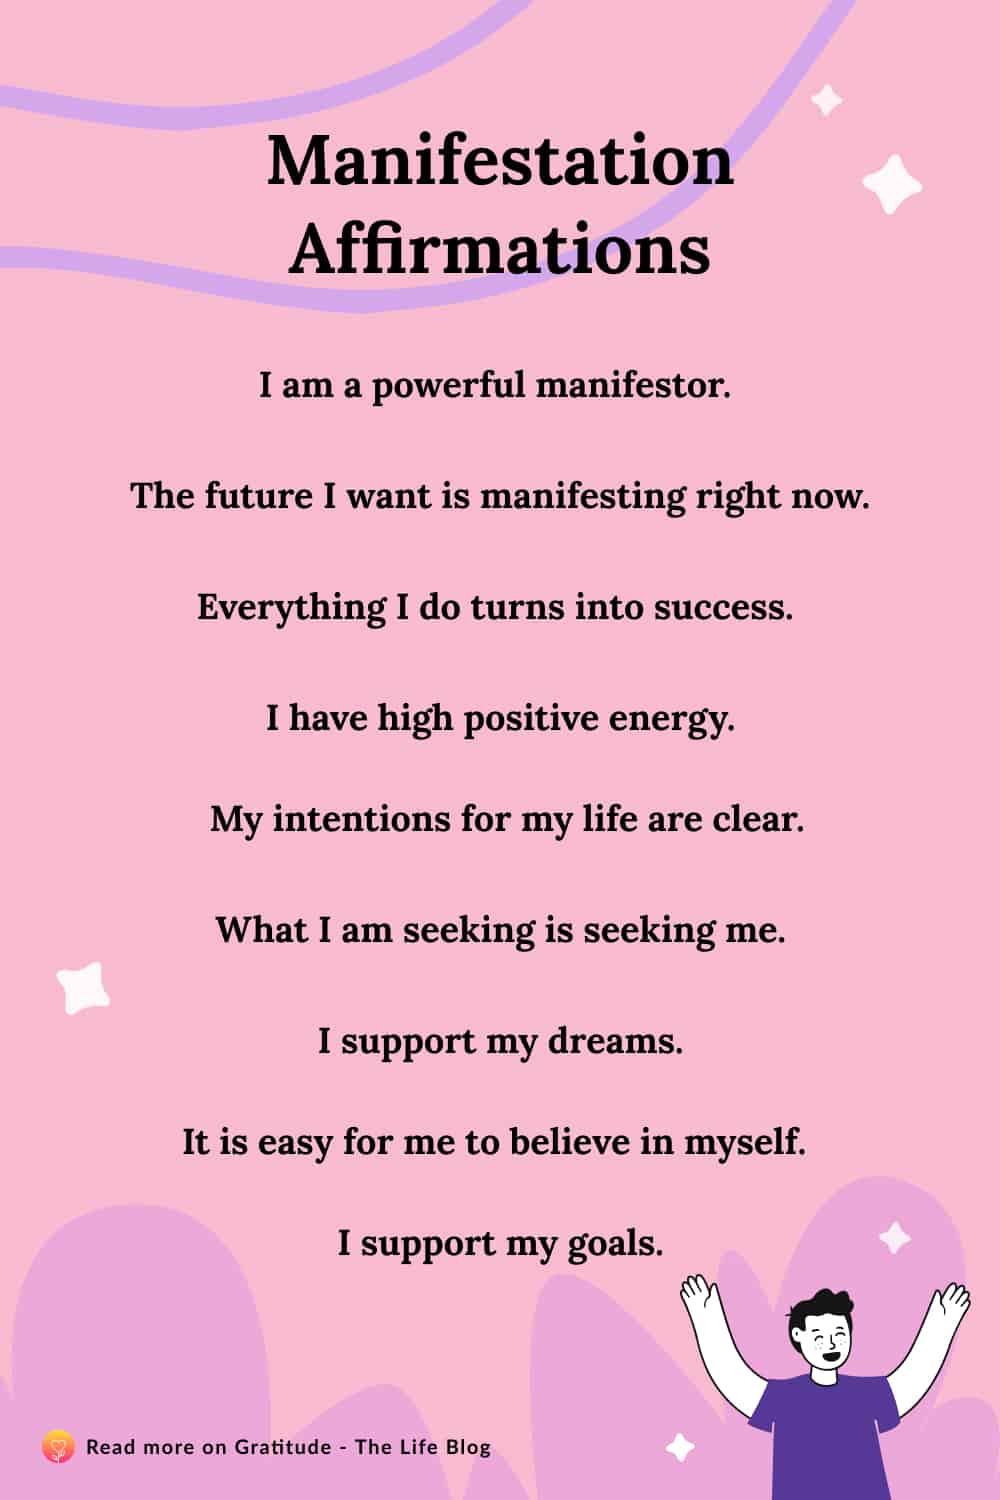 What are good affirmations for manifesting?